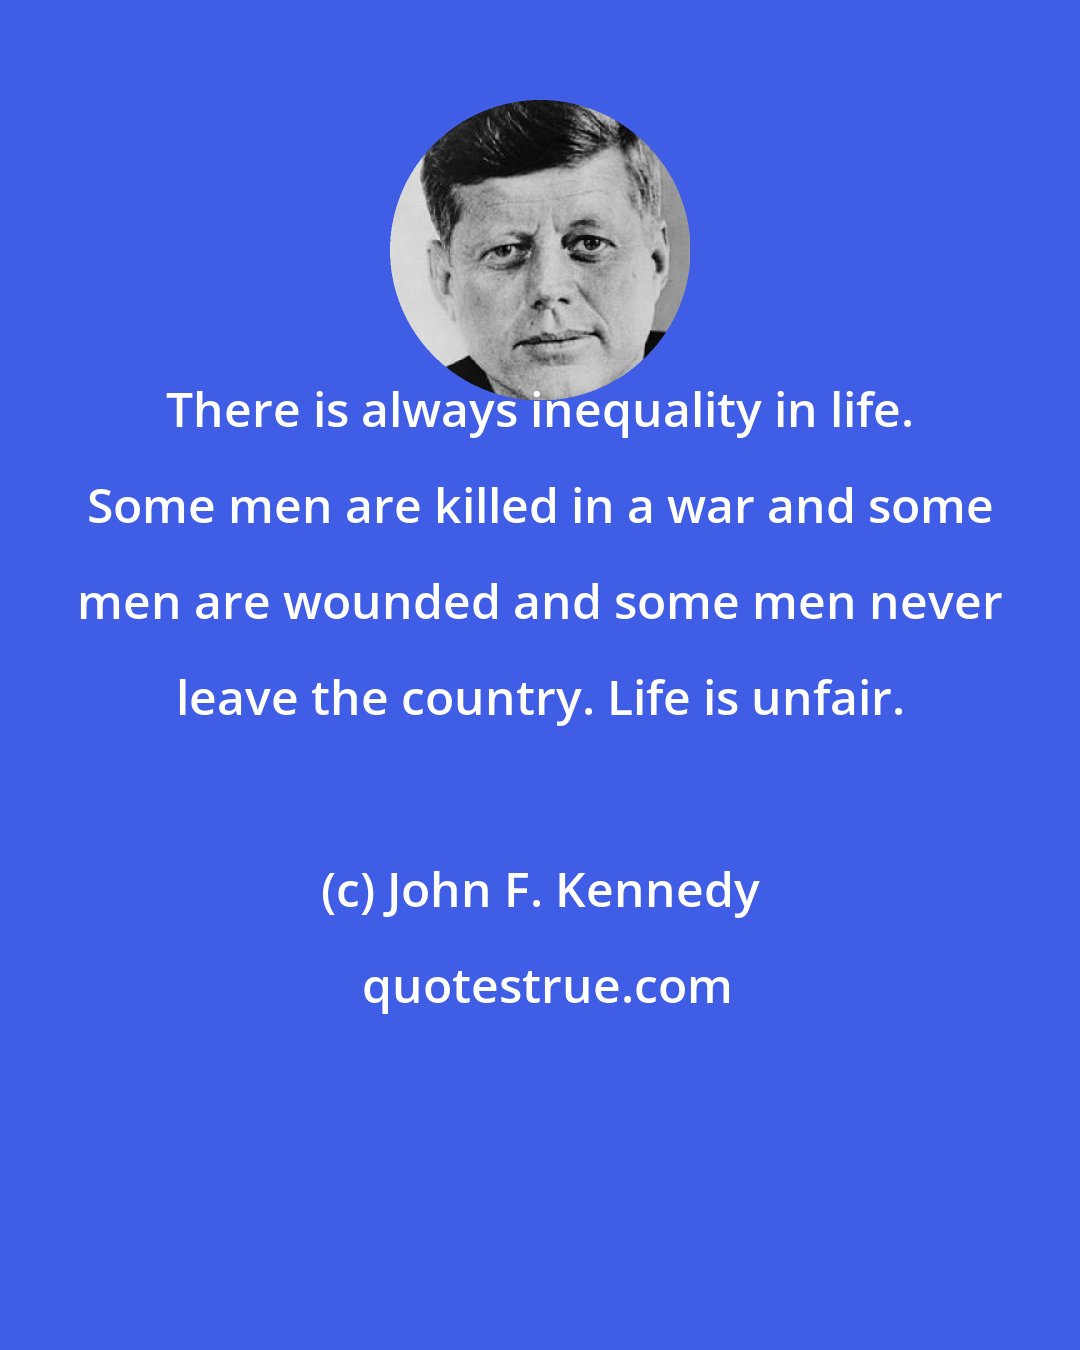 John F. Kennedy: There is always inequality in life. Some men are killed in a war and some men are wounded and some men never leave the country. Life is unfair.